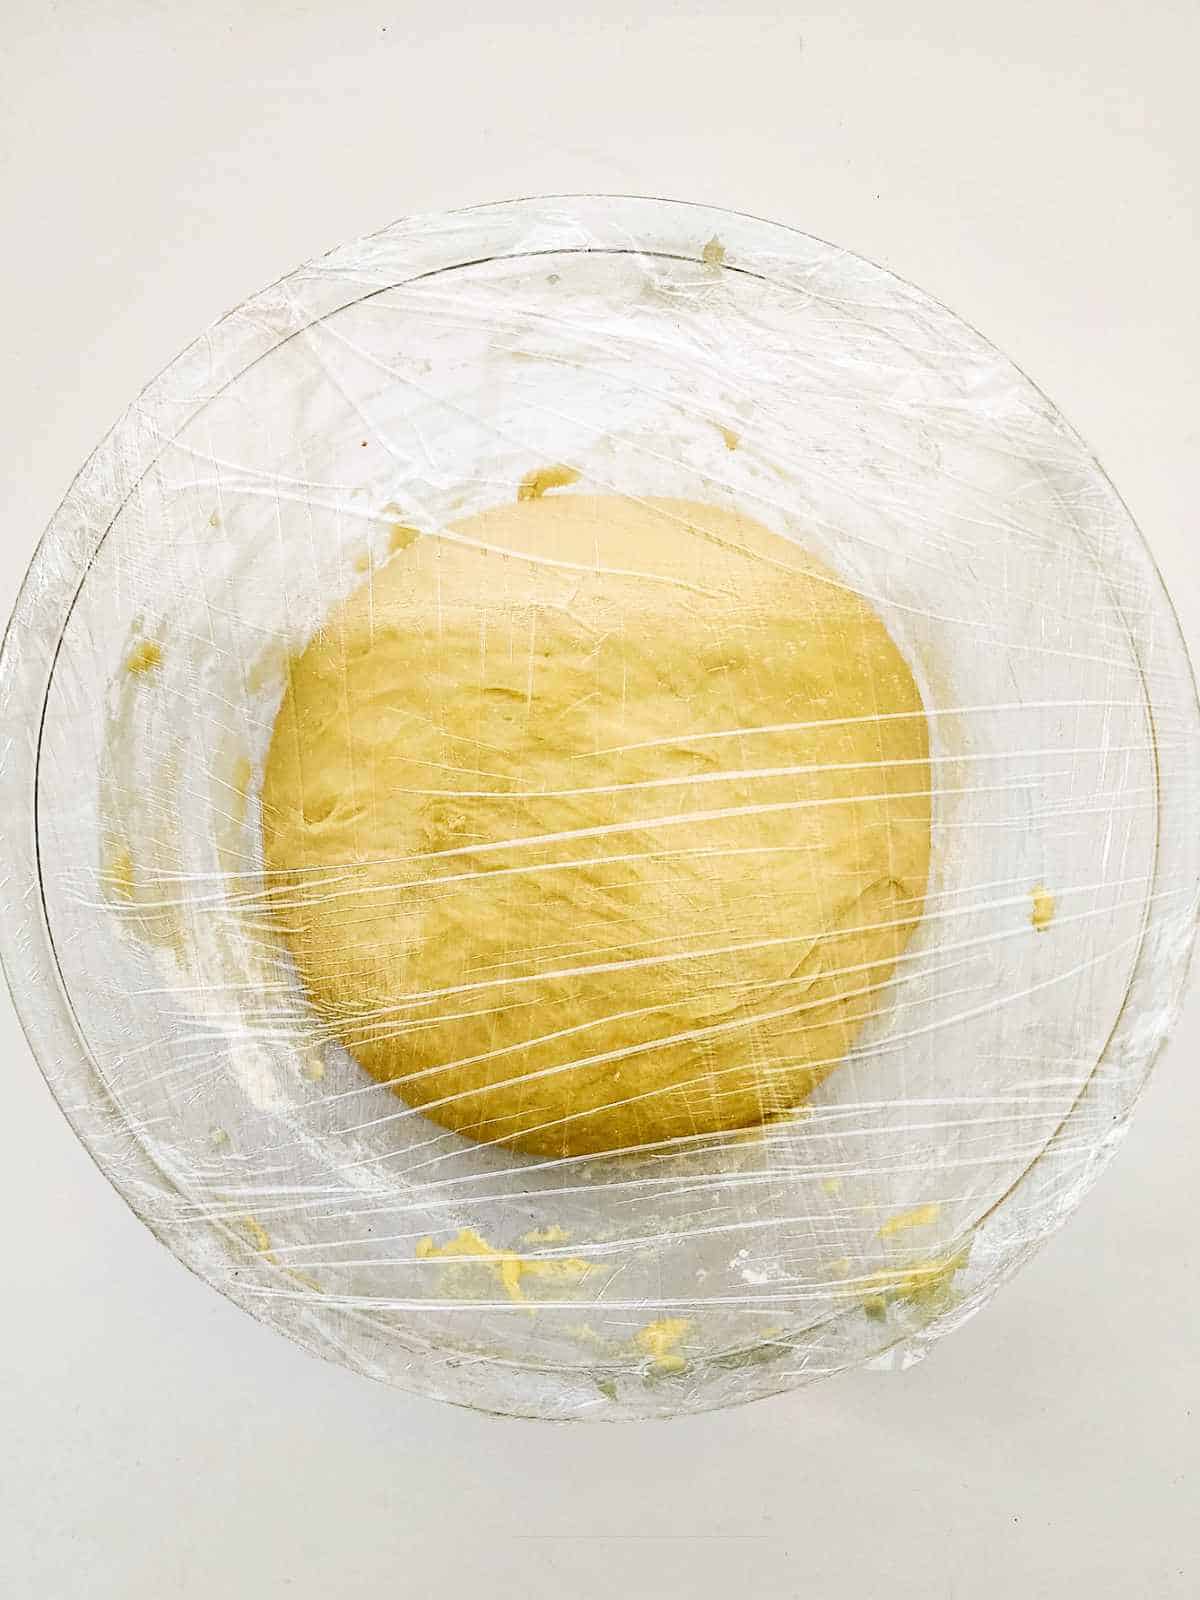 ball of dough in a bowl with plastic film cover while rising to double it's size.